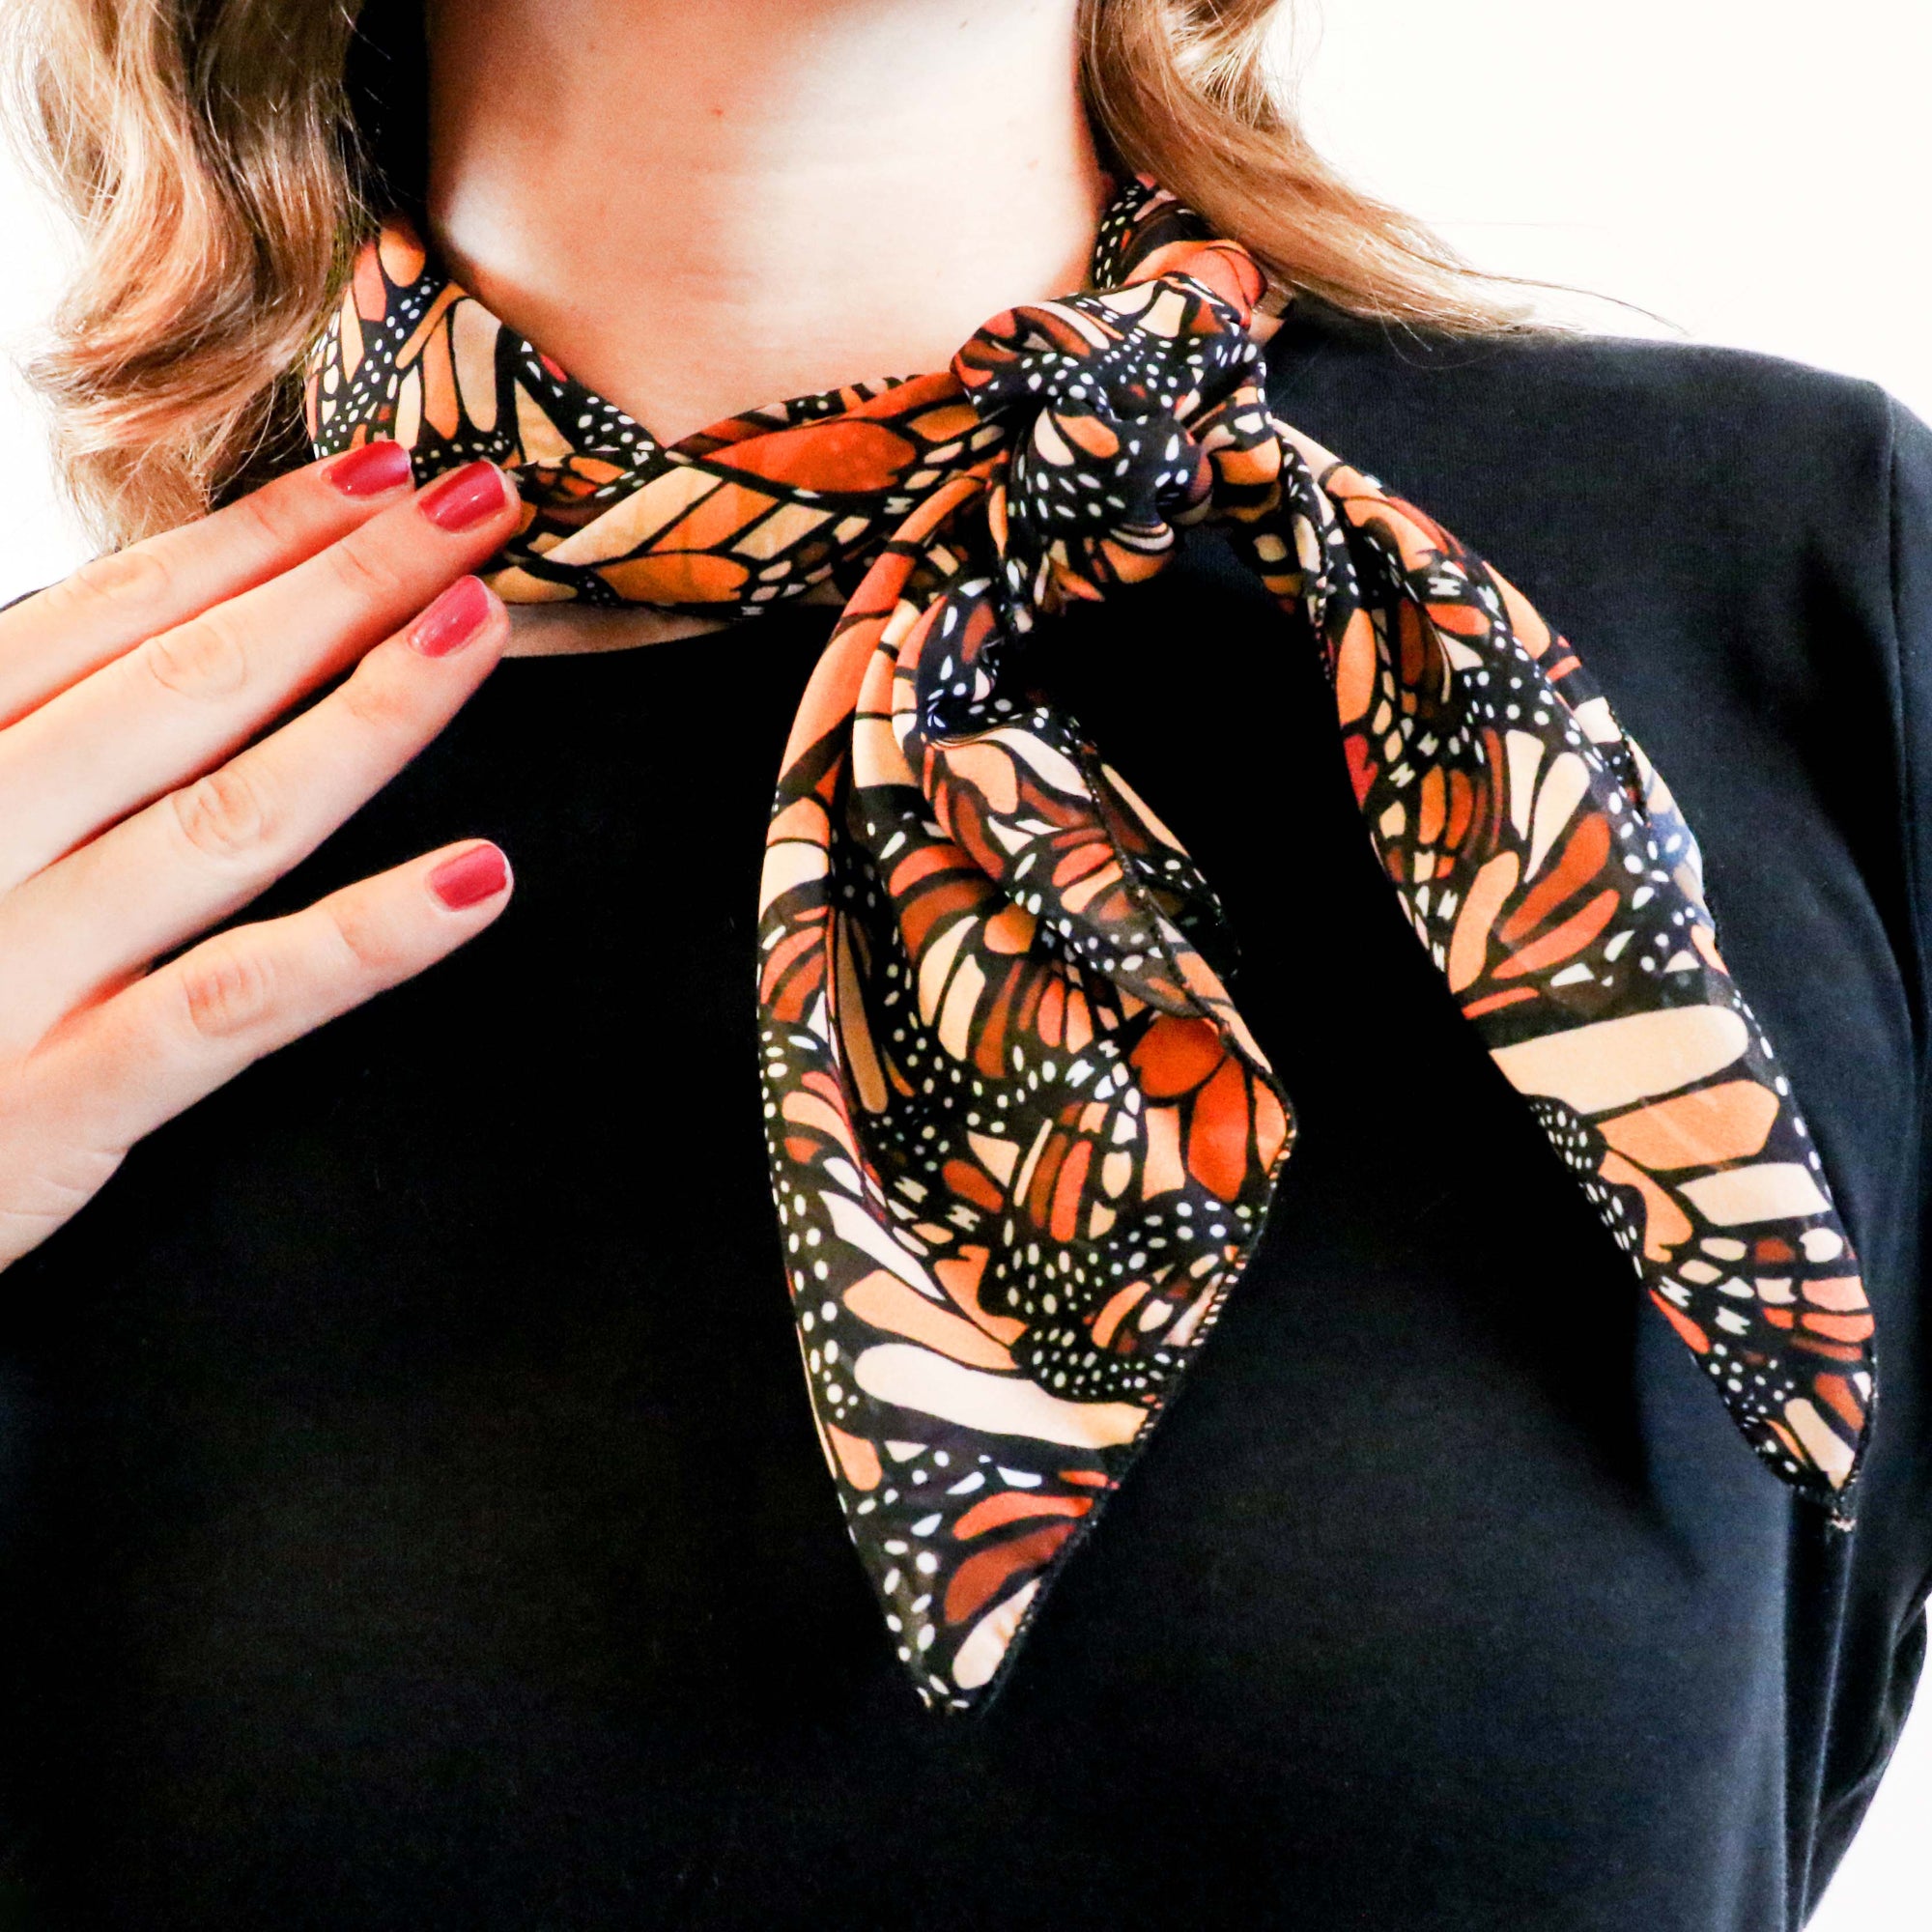 Butterfly Wings Square Scarf -  -  - Knotty Tie Co.